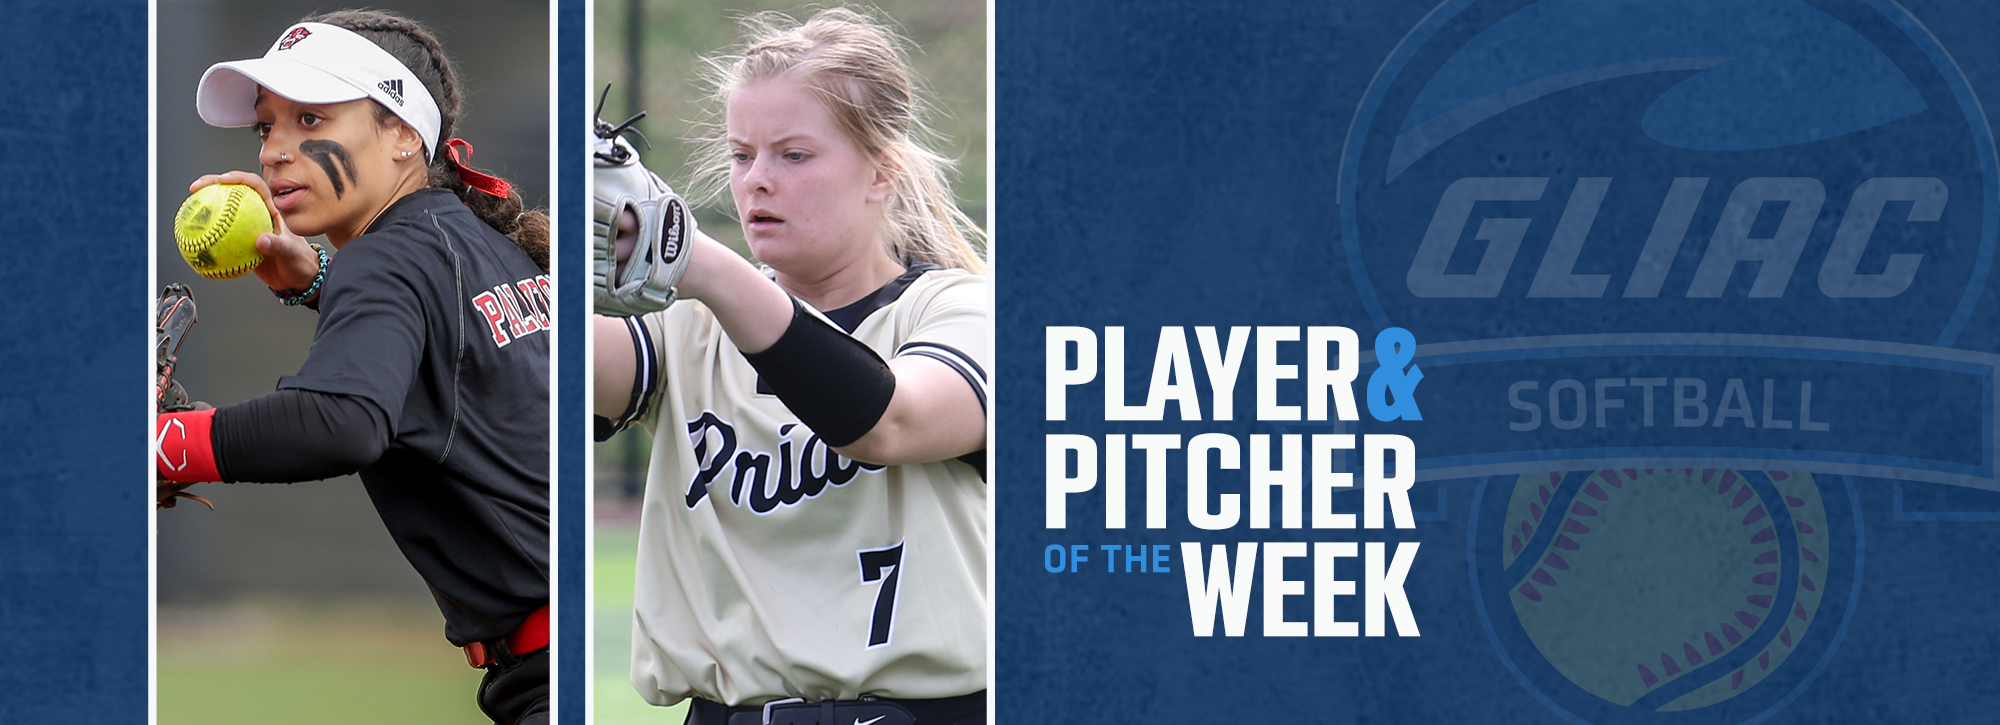 DU's Palazzolo and PNW's Hill earn weekly softball awards